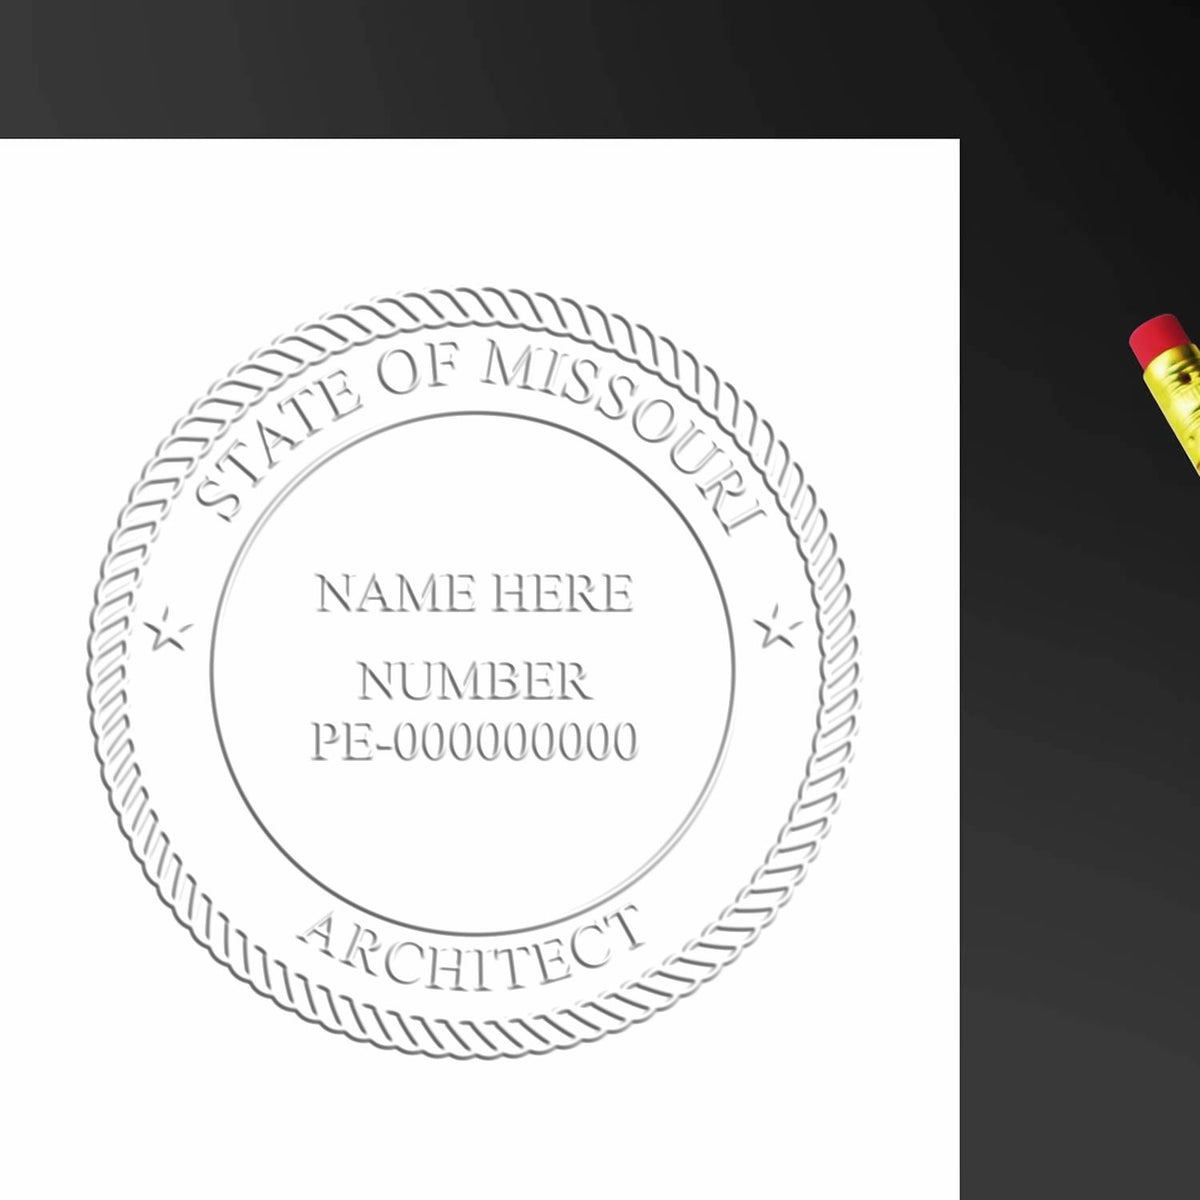 An in use photo of the Hybrid Missouri Architect Seal showing a sample imprint on a cardstock